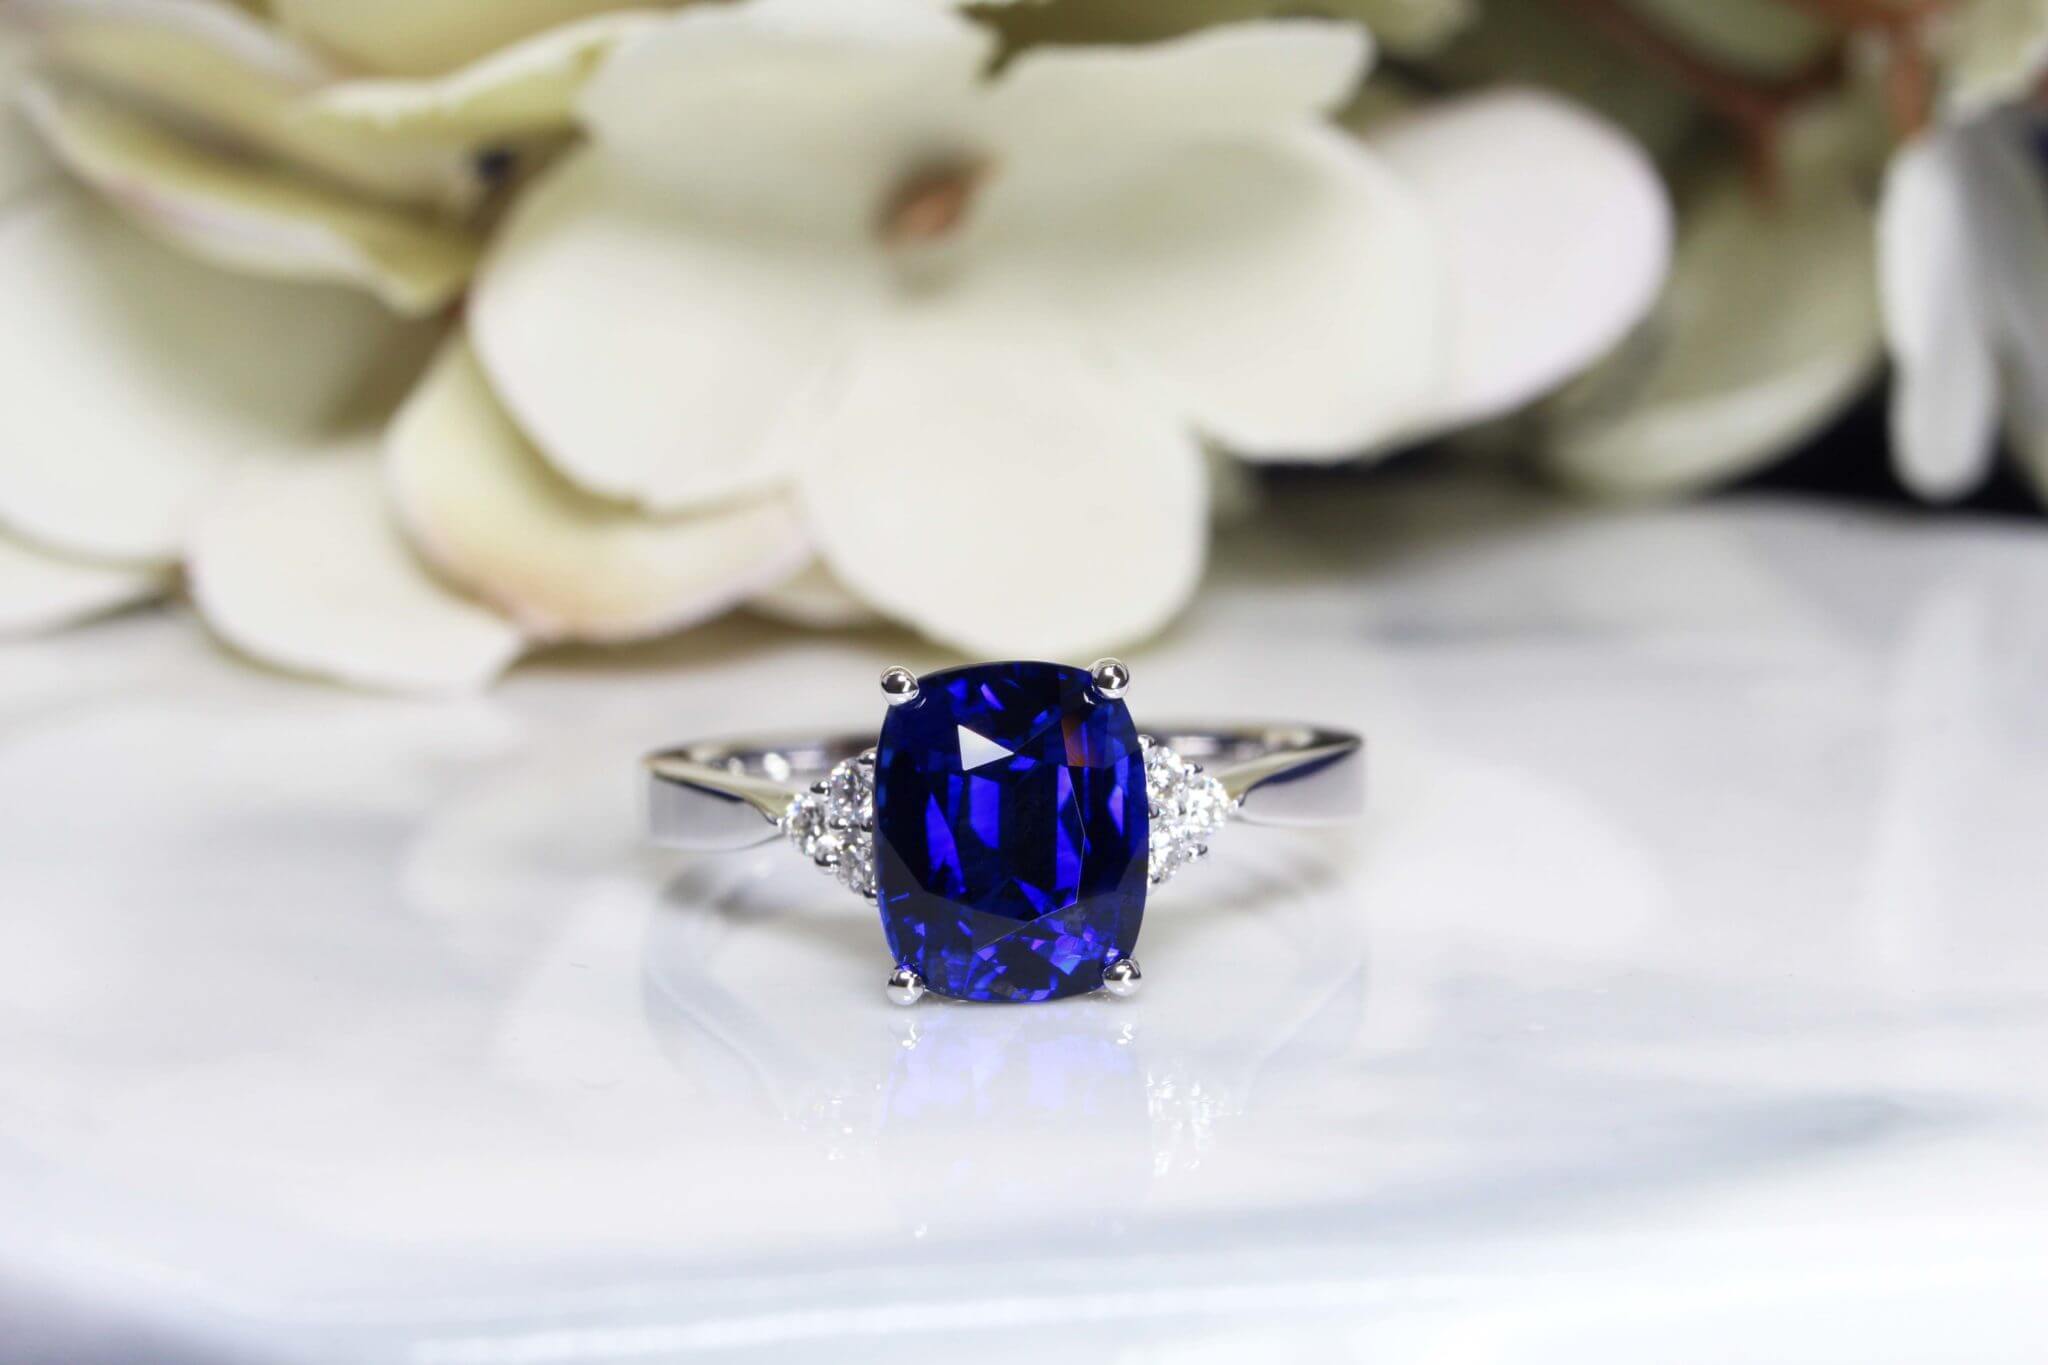 Royal Blue Sapphire vivid blue with a slight violet hue in it - Customised design featuring unique coloured gemstone gemstone | Local Singapore Private Jewellery in Customised Wedding Ring custom set with coloured gemstone.